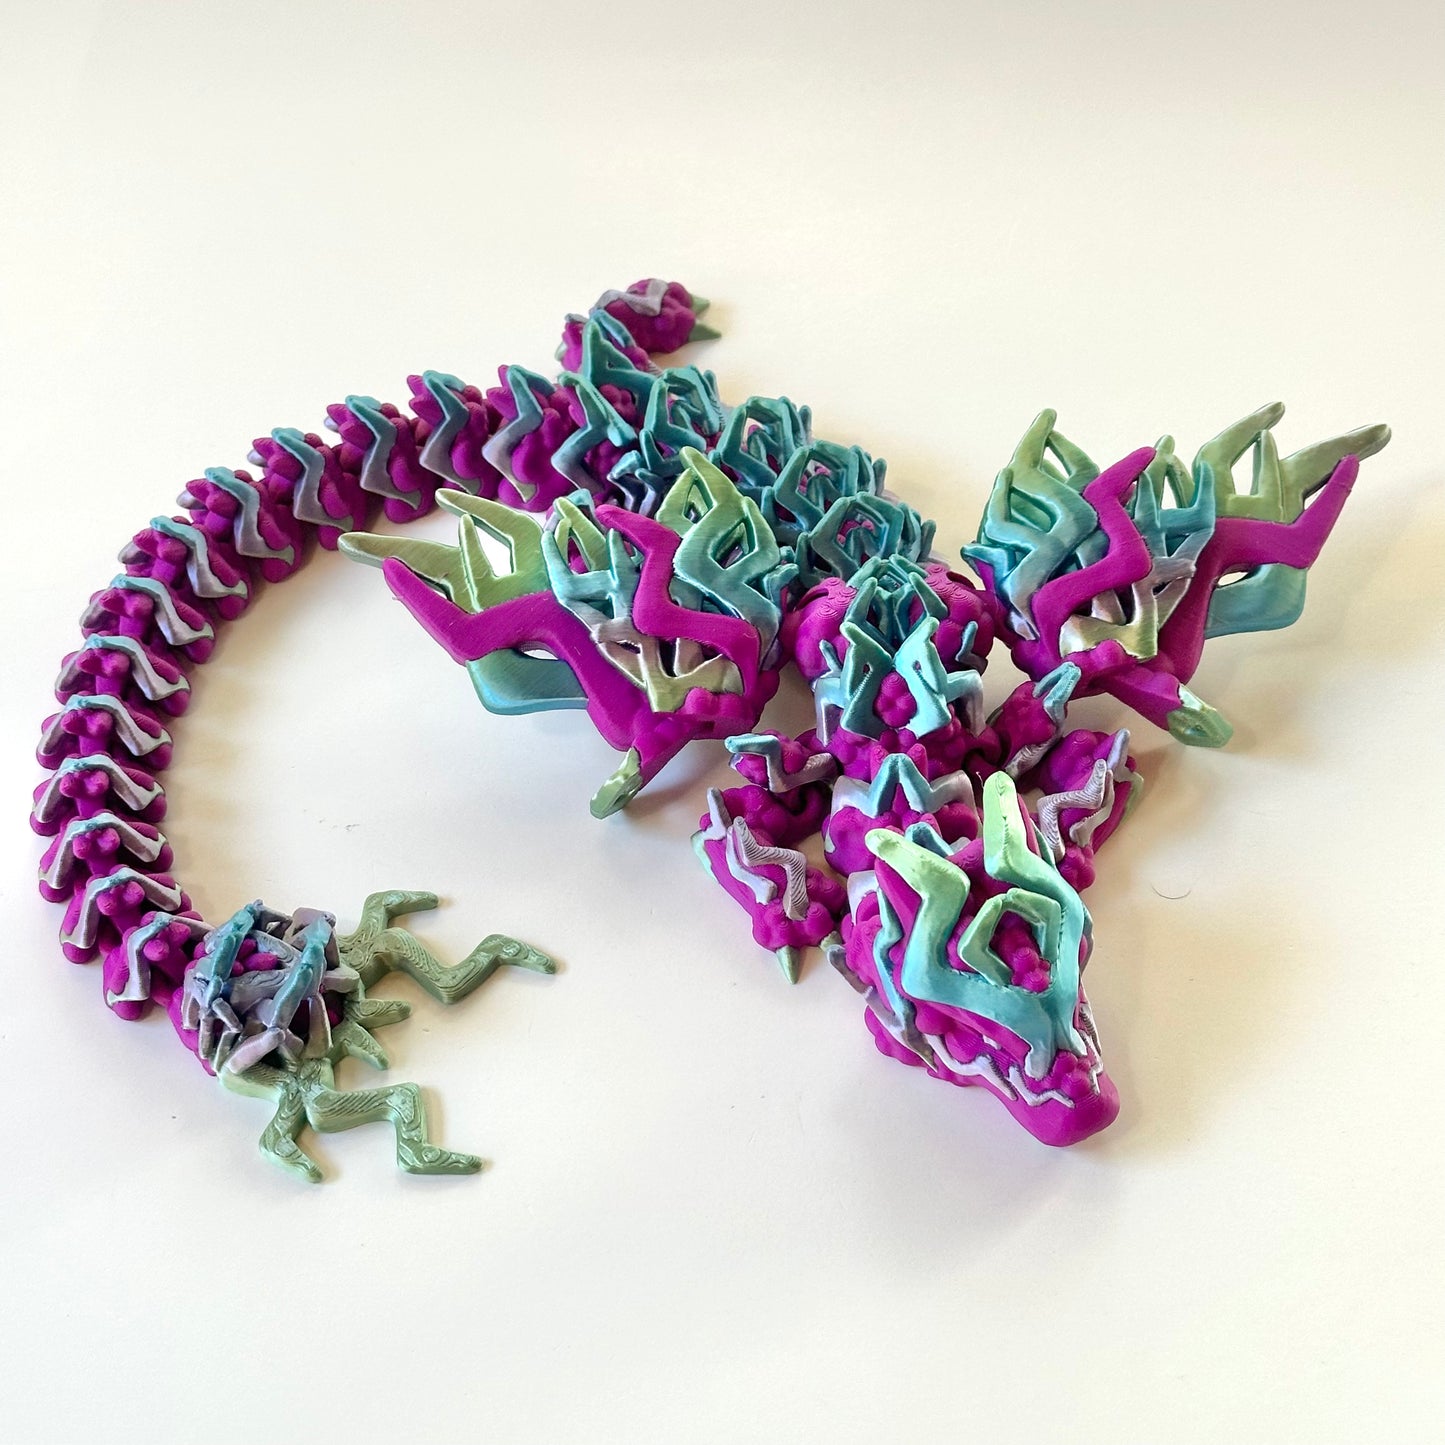 Large Storm Wing Dragon - 3D Printed Articulating Figure